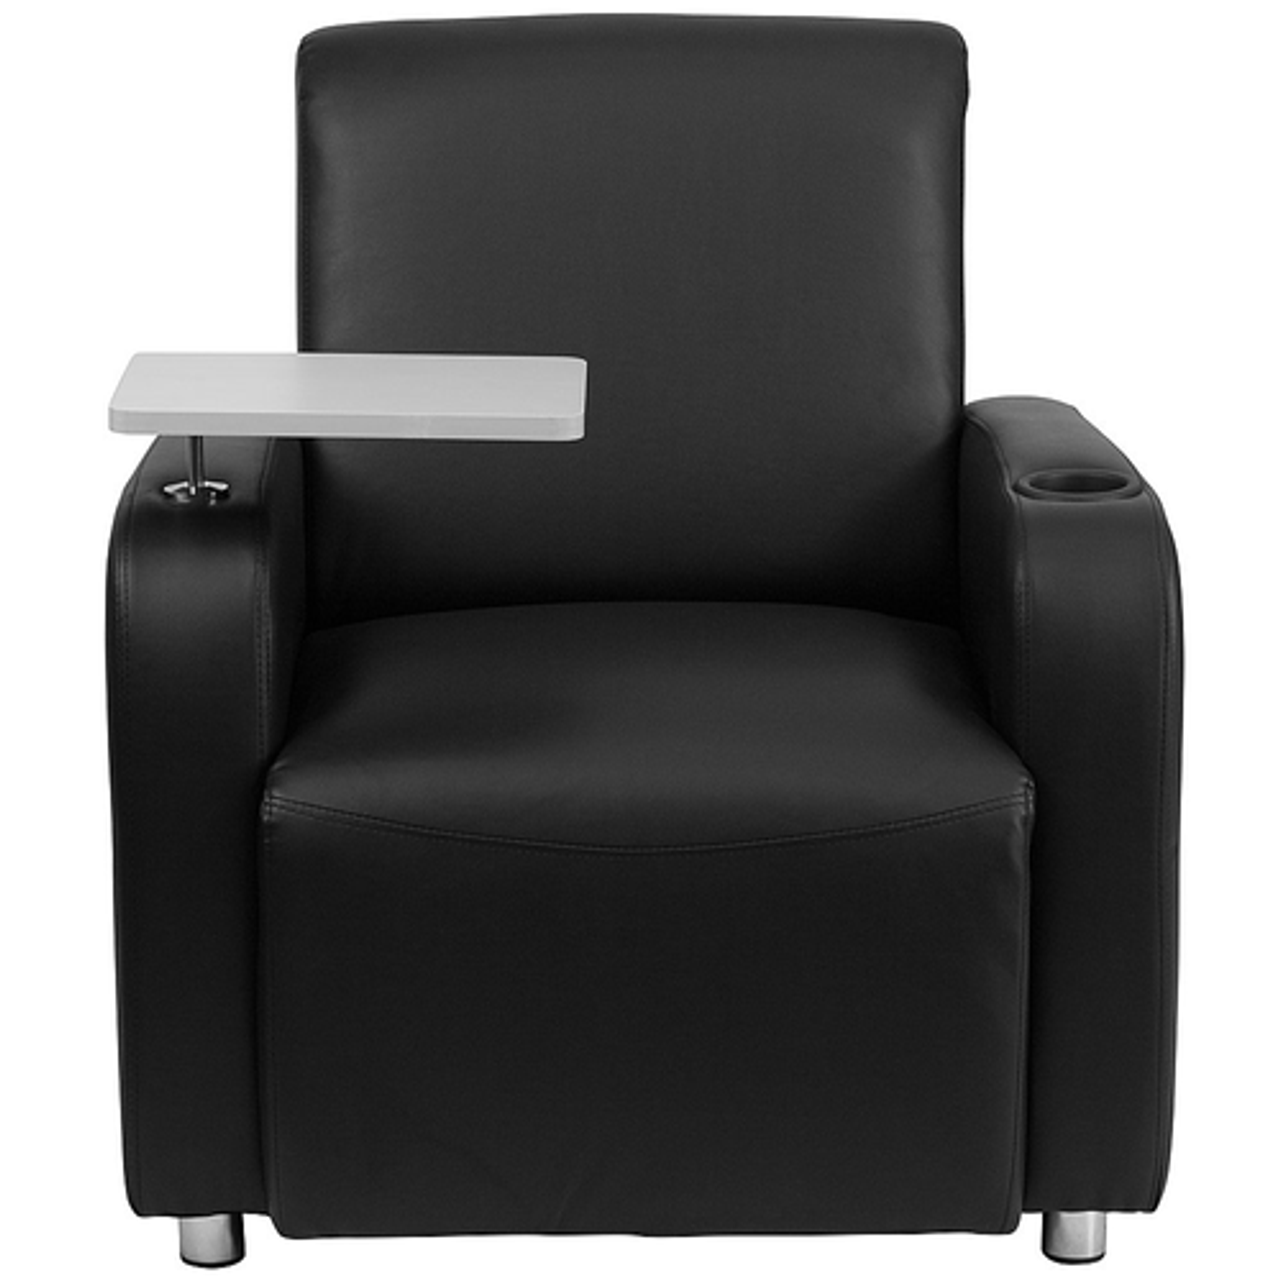 Flash Furniture - LeatherSoft Guest Chair with Tablet Arm, Chrome Legs and Cup Holder - Black